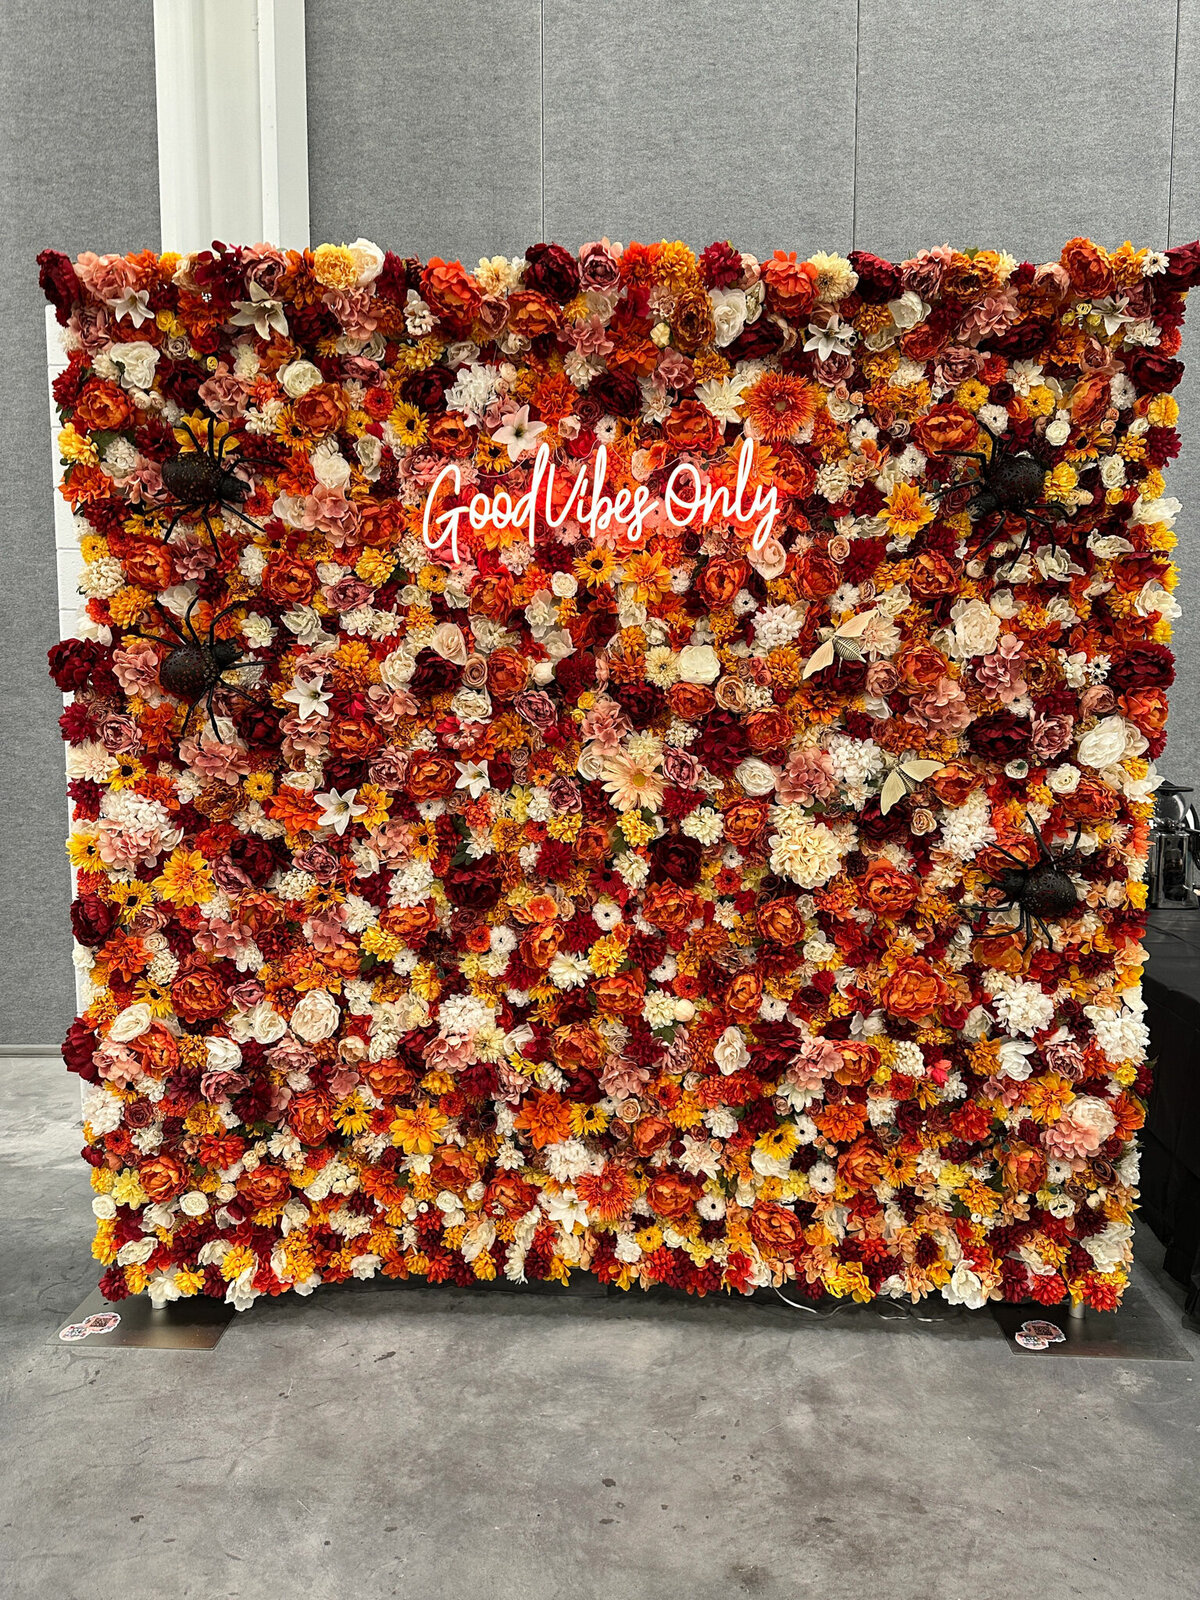 Autumnal Bloom floral wall featuring warm fall hues and rustic florals from Love In Bloom, romantic decor rentals based in Lethbridge, AB. Featured on the Brontë Bride Vendor Guide.